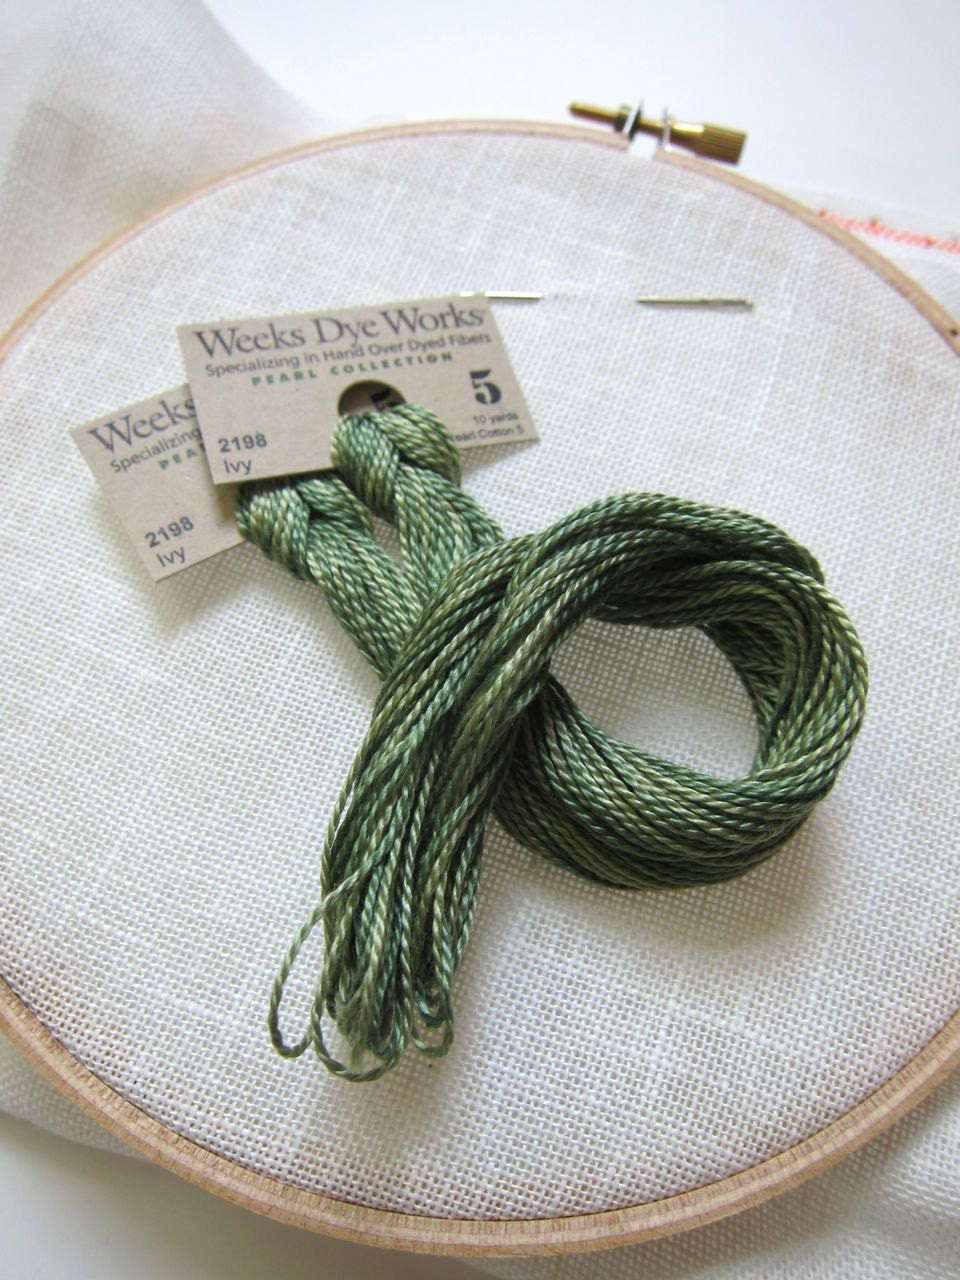 Pearl Cotton Thread - Weeks Dye Works Size 5 Ivy Perle Cotton - Snuggly Monkey